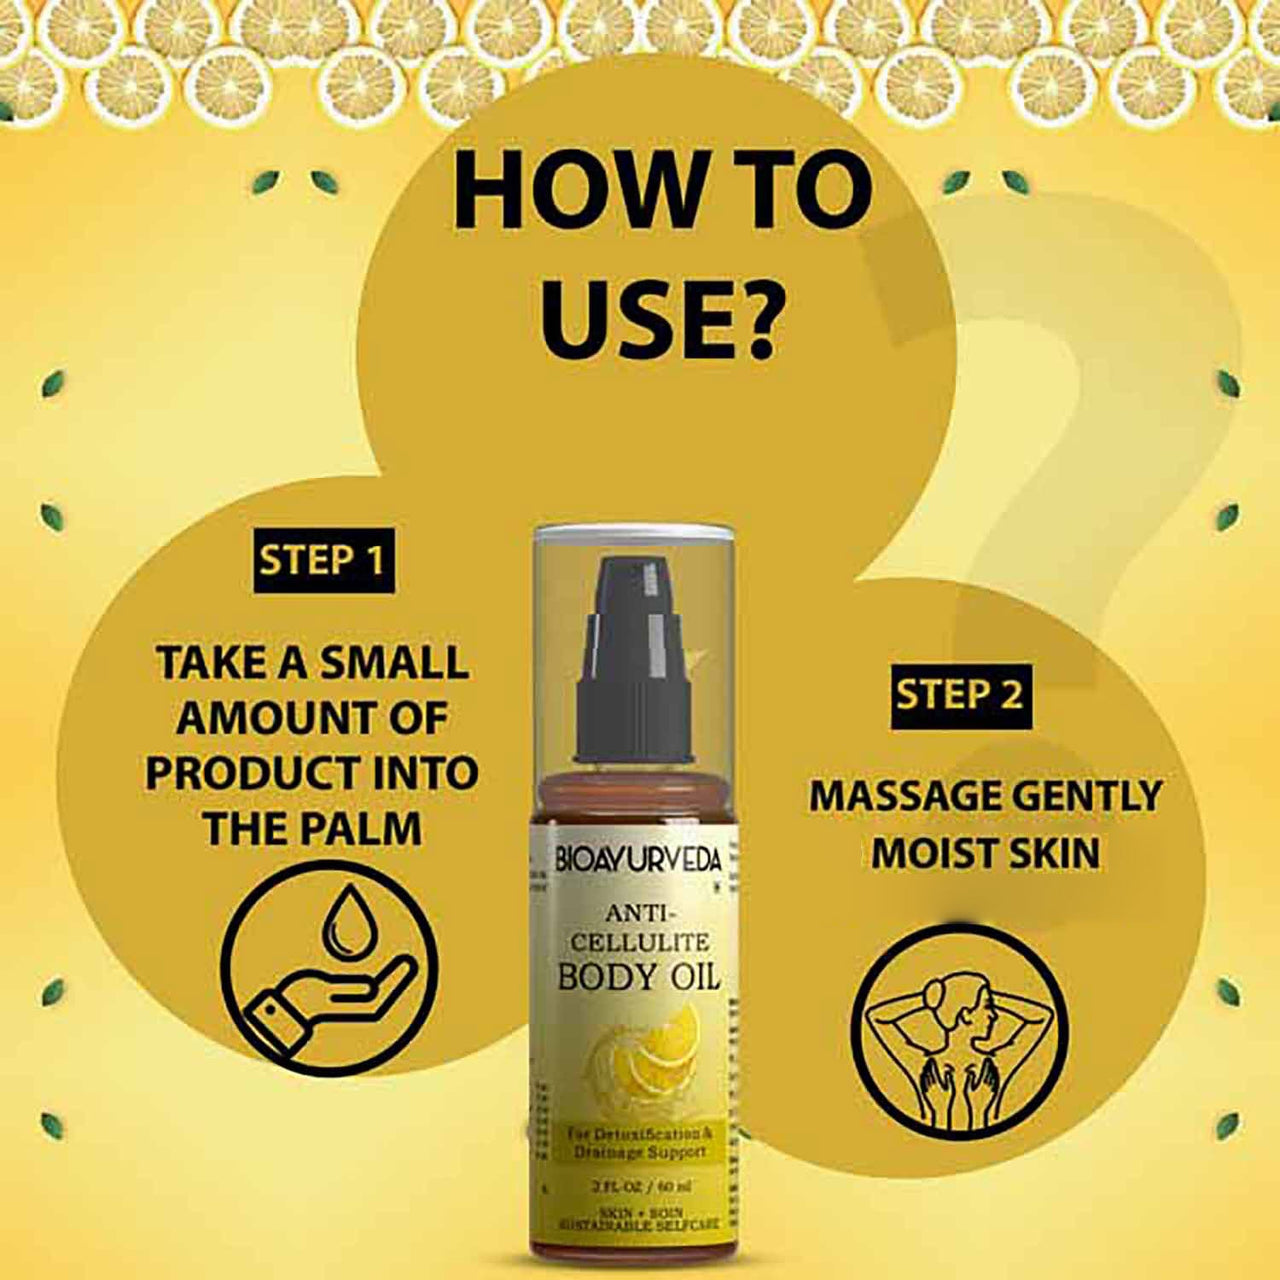 How to use Cellulite Body Oil